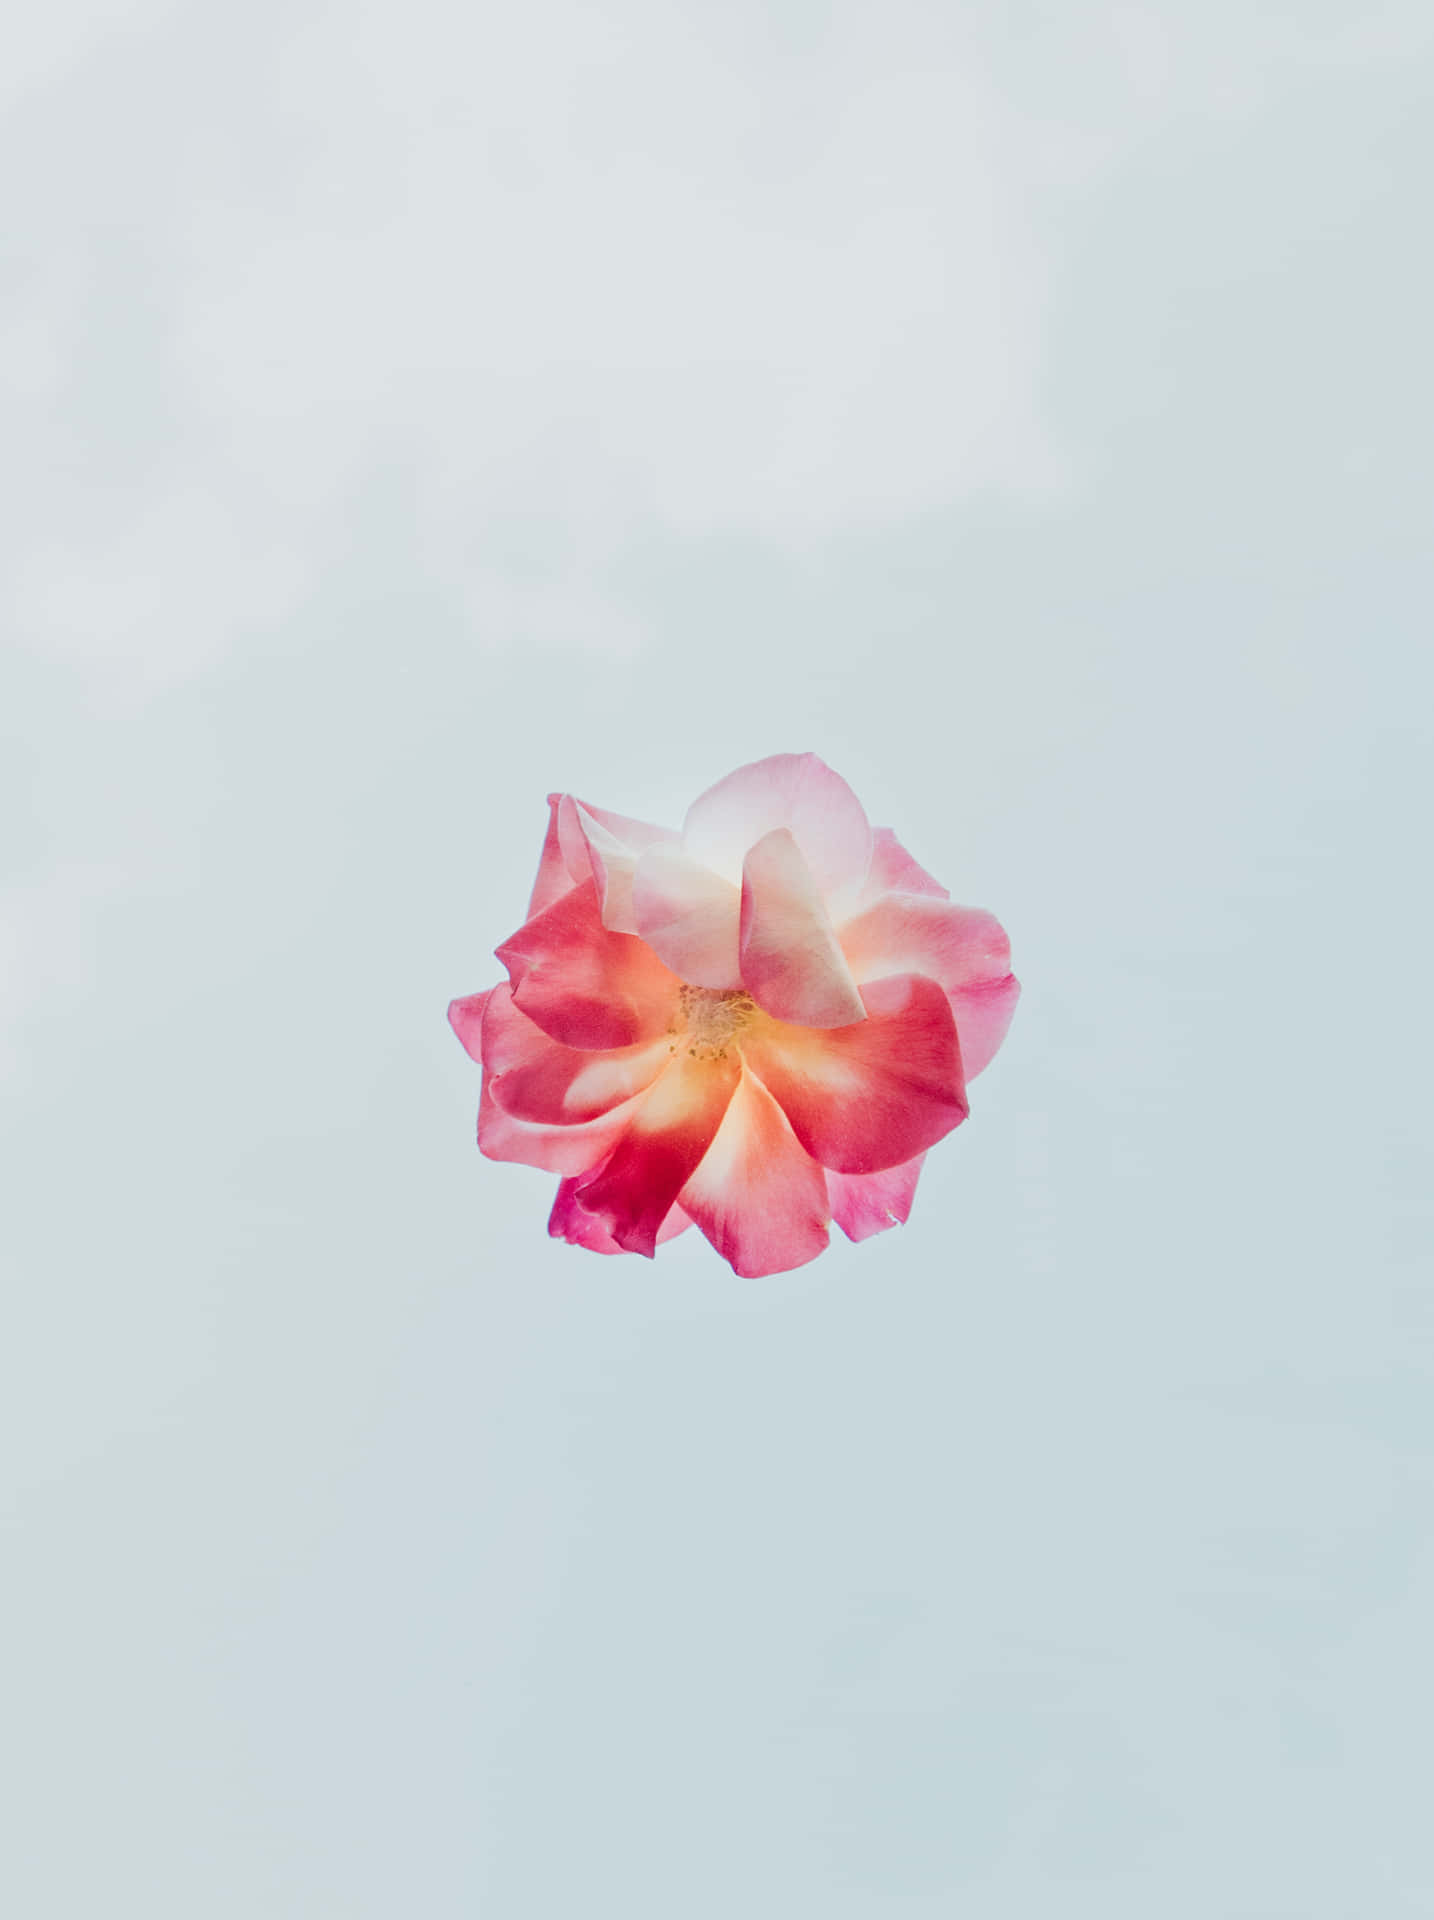 Brighten up your day with a Simple Flower Wallpaper